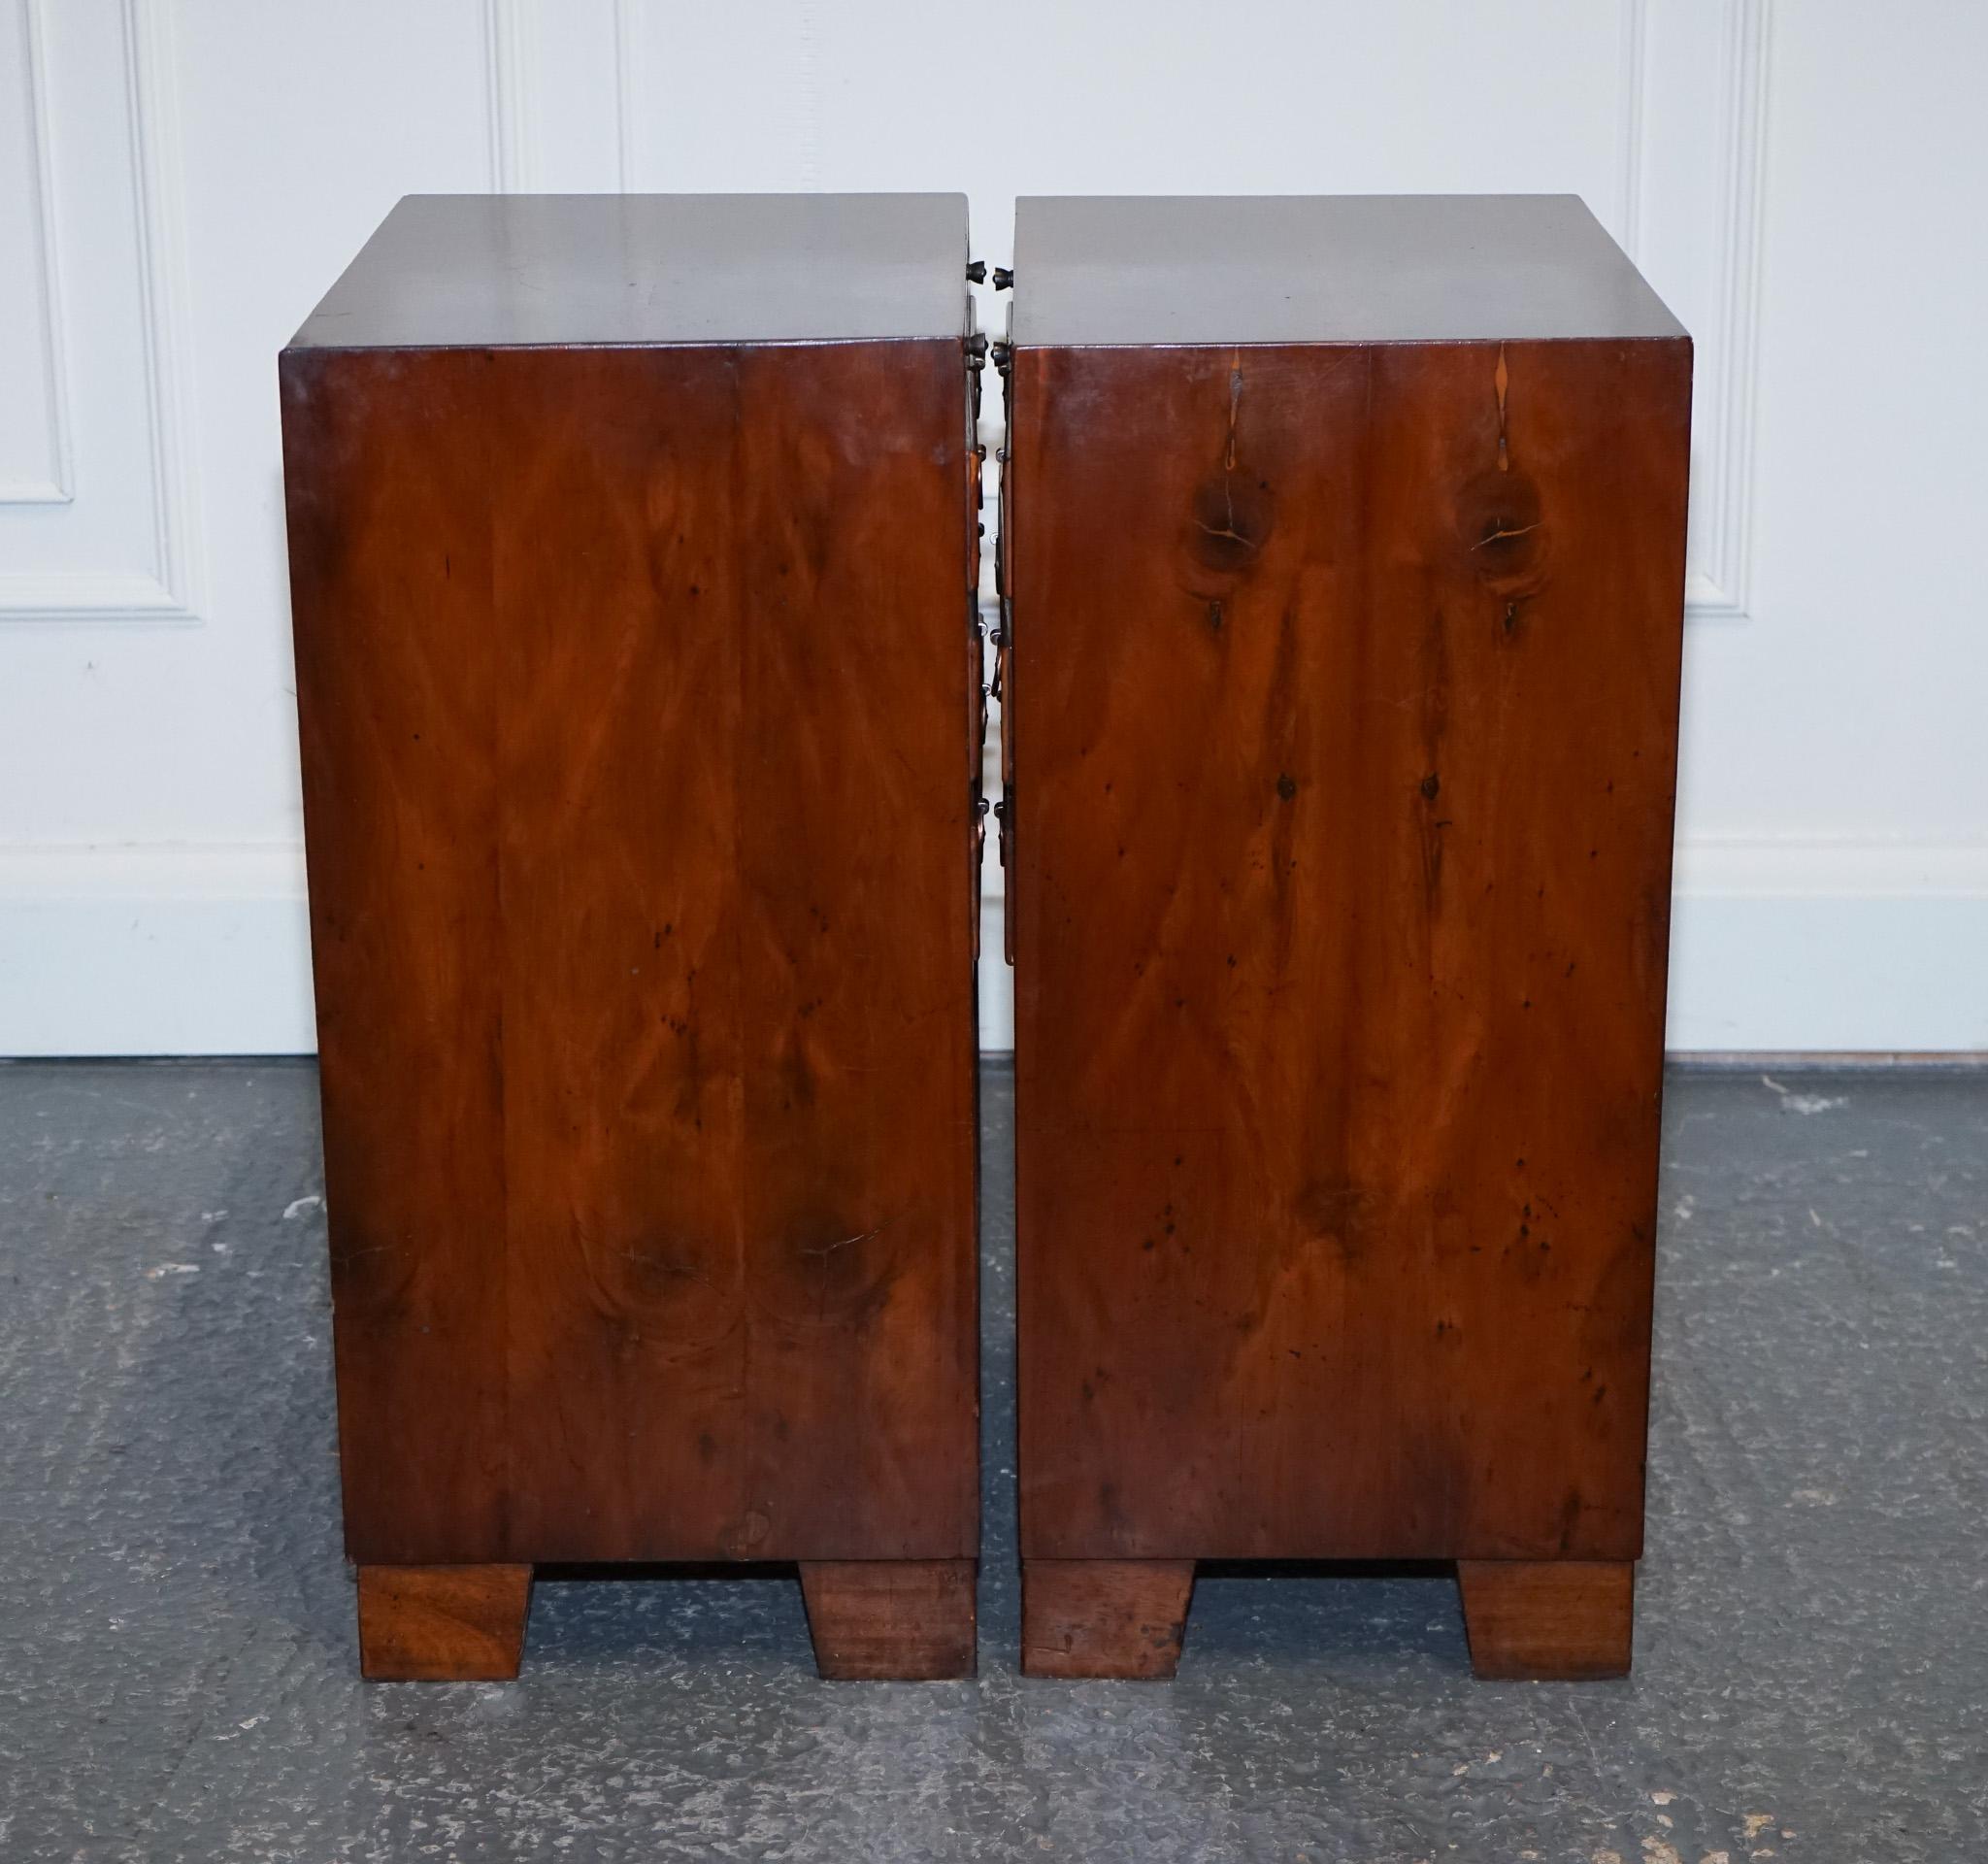 20th Century GORGEOUS PAIR OF HARDWOOD GEORGIAN STYLE NIGHTSTANDS WiTH DRAWERS